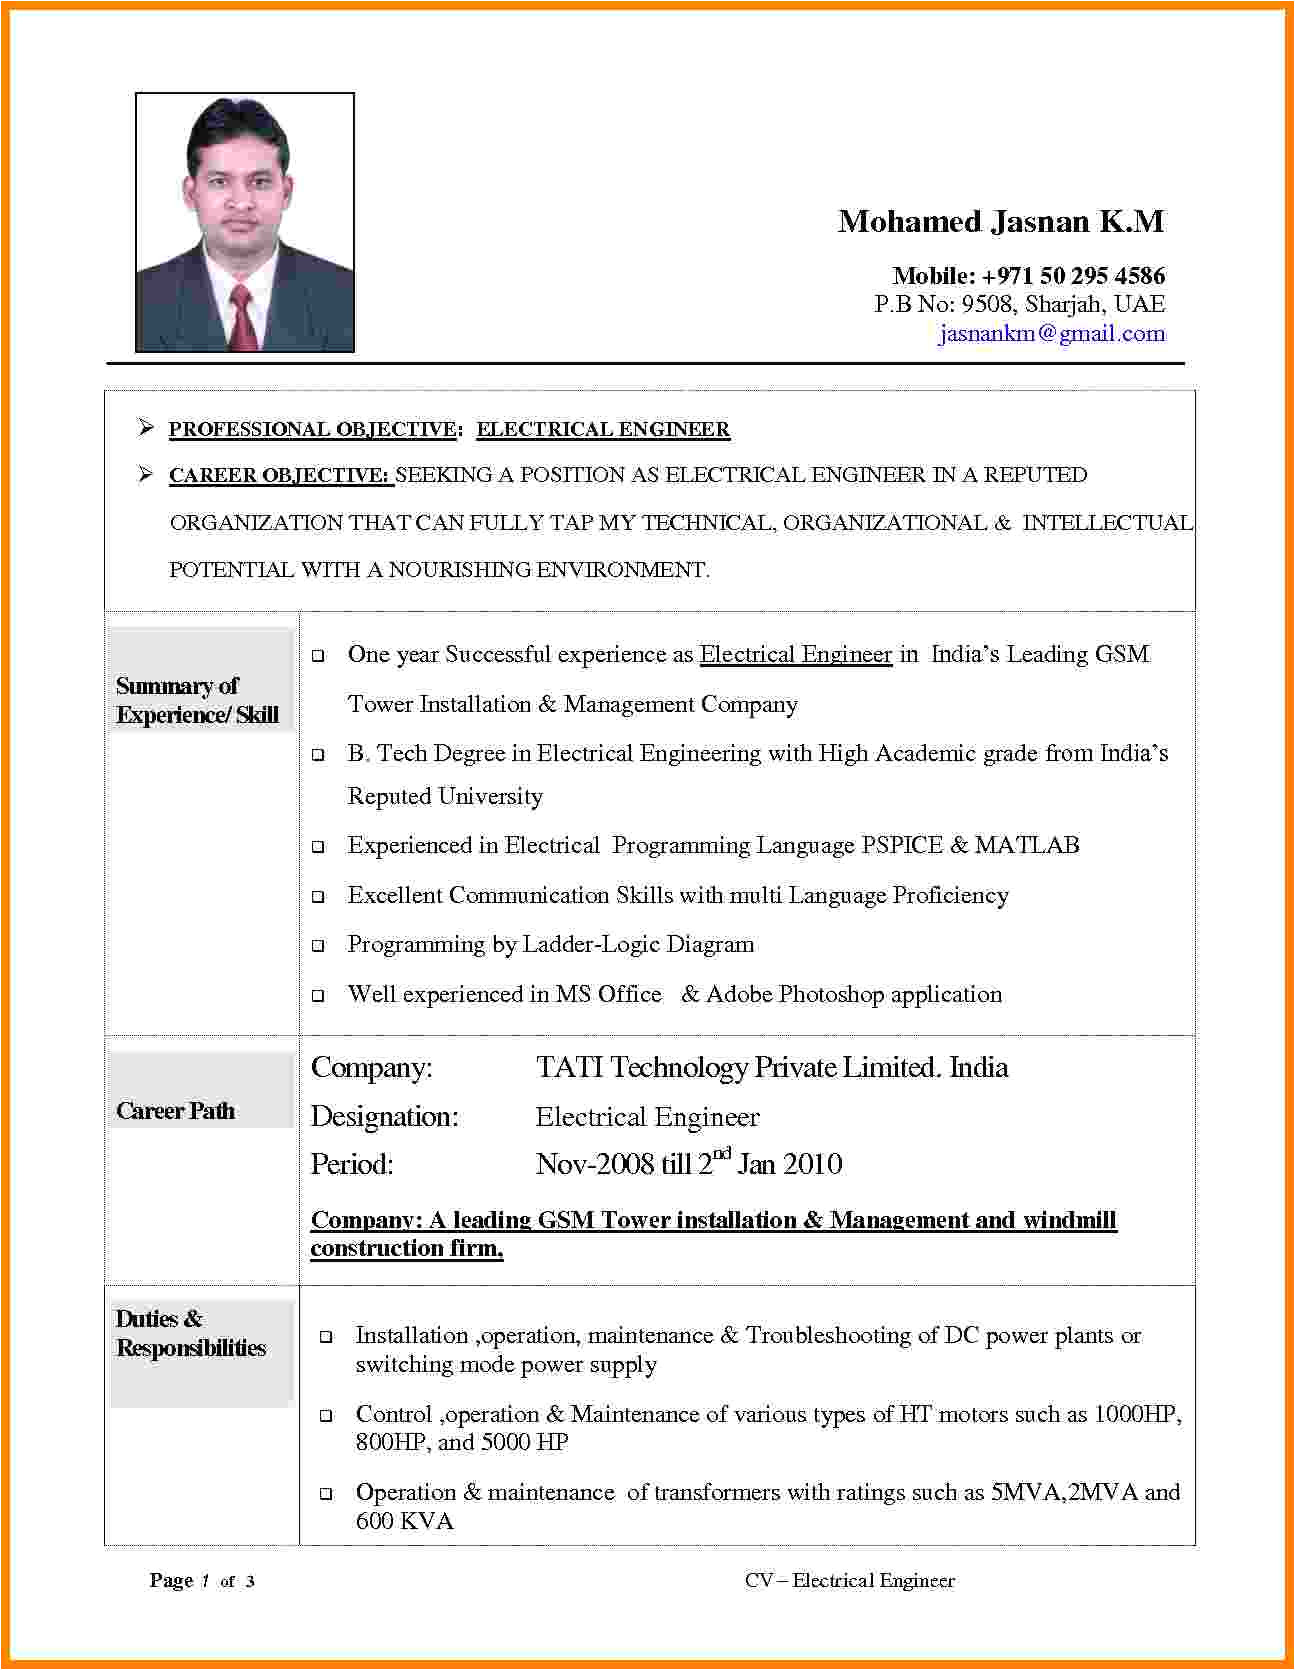 9 curriculum vitae examples for engineers